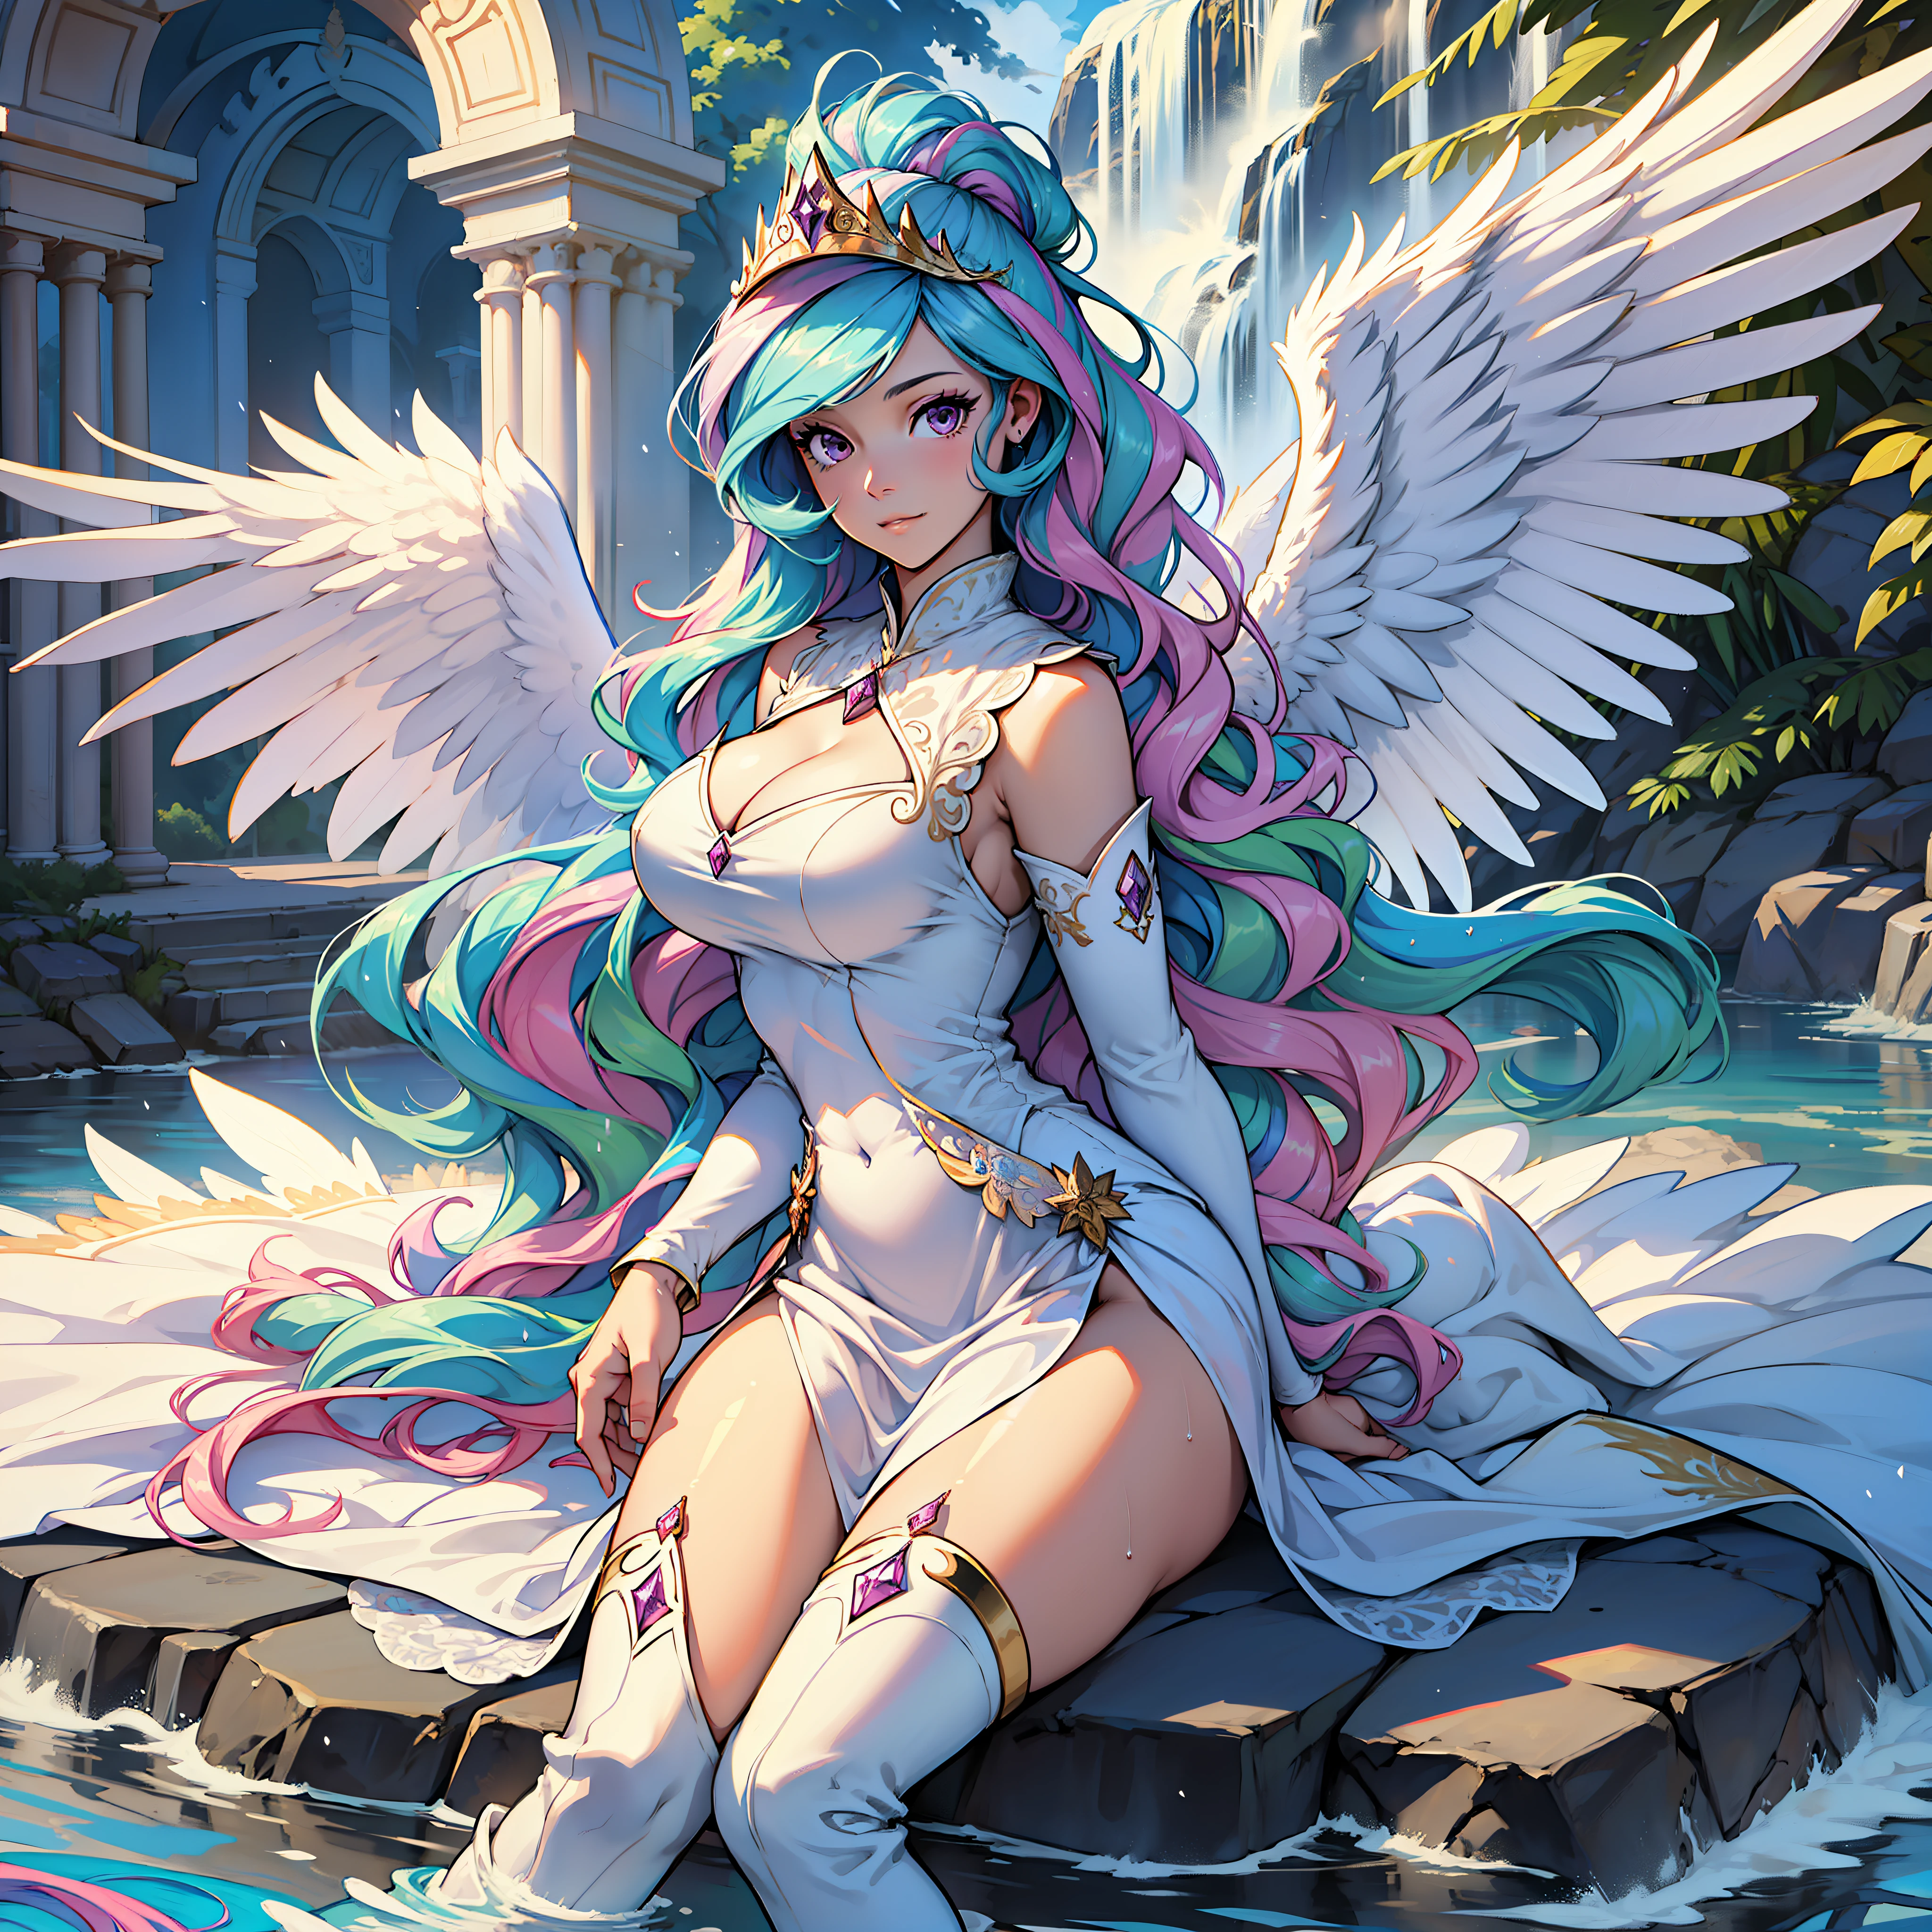 Celestiahuman, Princess Celestia from my little pony, Princess Celestia in the form of a girl, big breasts, lush breasts, voluminous breasts, elastic breasts, you can see the whole body, shin, heels, feet, five fingers, detailed hands, Big white angel wings behind the back, white feathers, thin lace white dress, the dress is wet, translucent, stands against the background of the palace, stands straight, white knee-high boots, palace in the mountain,  waterfall from the palace, dawn, white feathers flying, palace far away